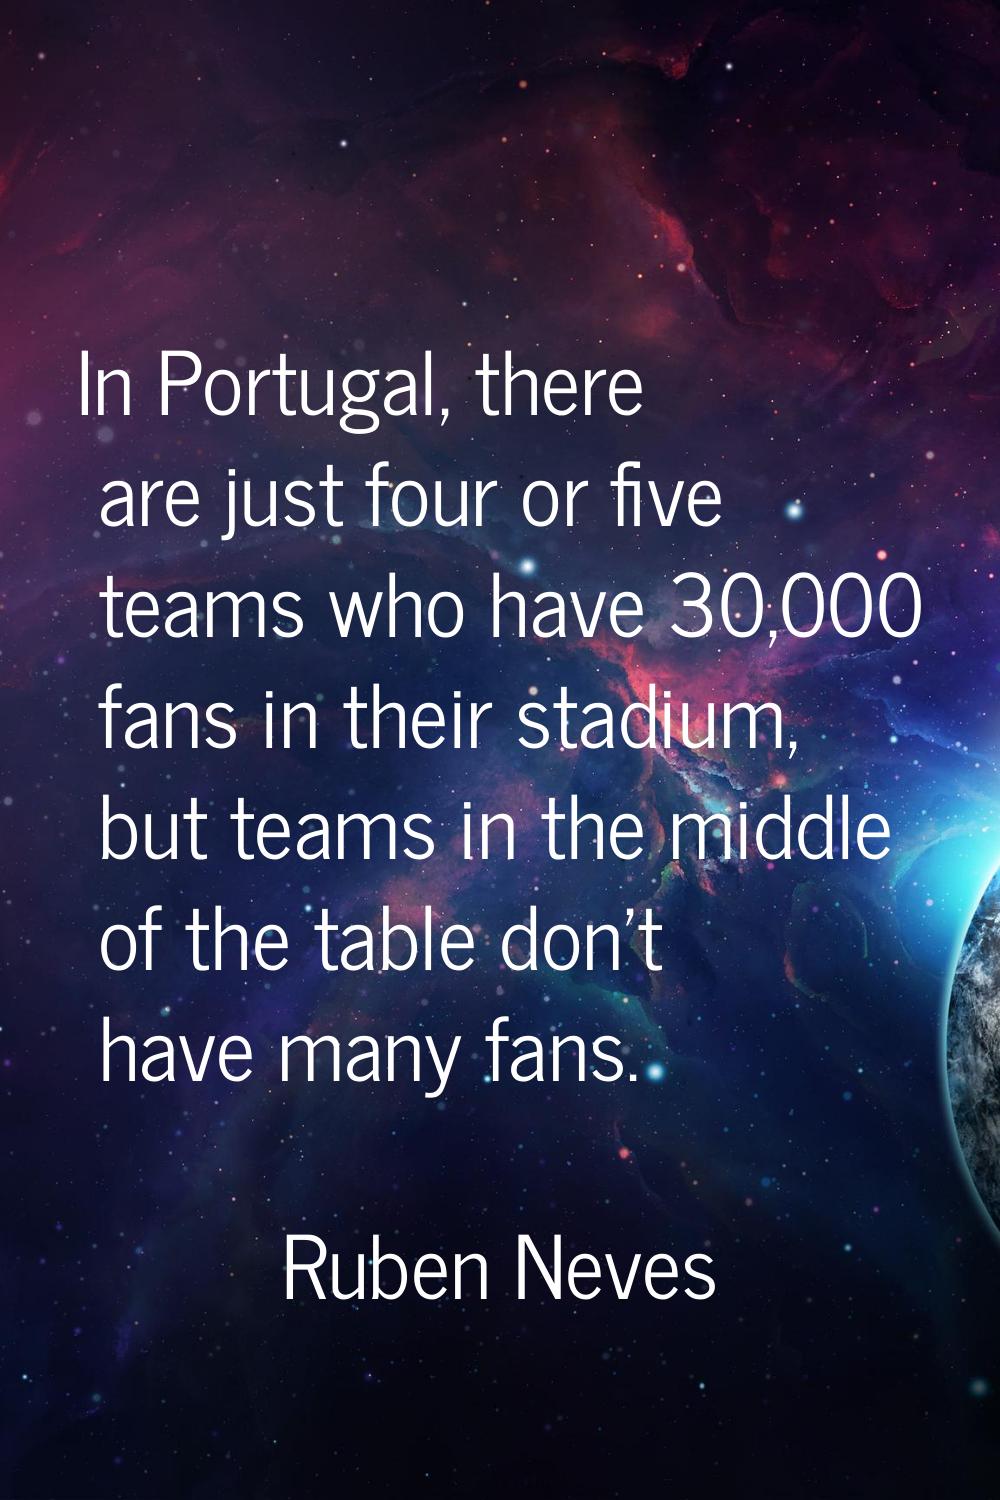 In Portugal, there are just four or five teams who have 30,000 fans in their stadium, but teams in 